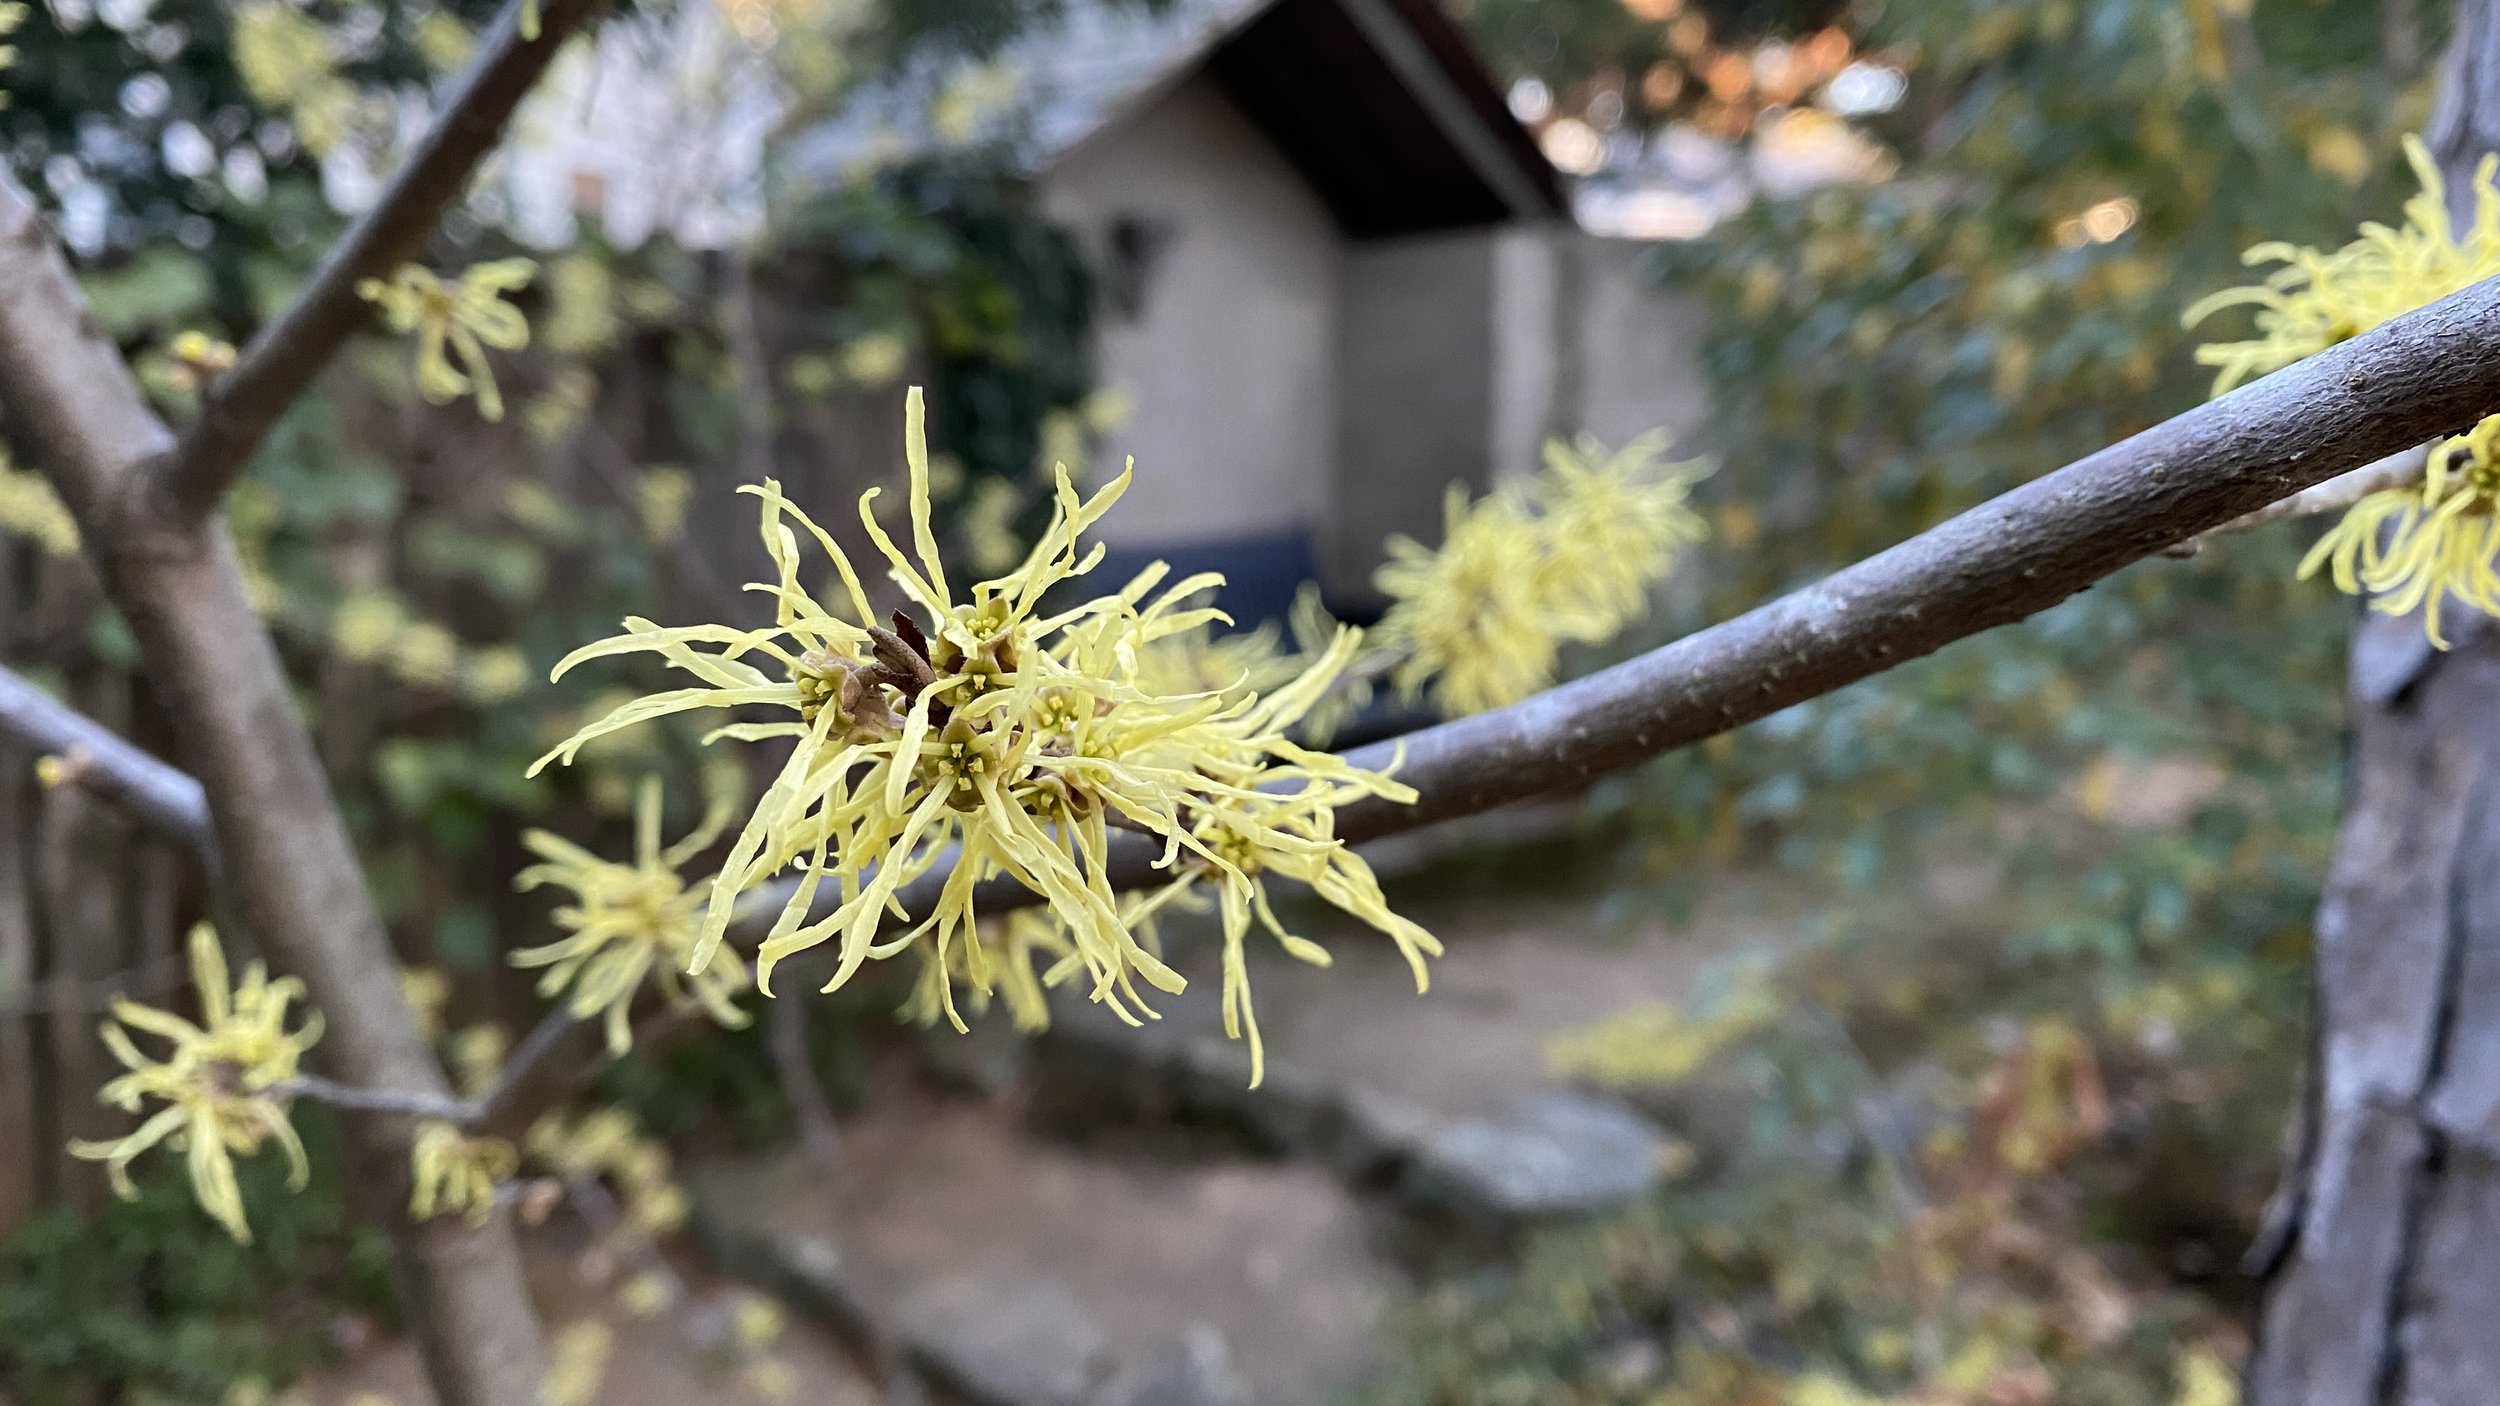  Elizabeth’s  Hamamelis virginiana  (witch hazel) is blooming better this year than it has in the past eleven years.  She wrote of its clean astringent aroma, which I  noticed only briefly—the first late afternoon the flowers began unfurling a week o